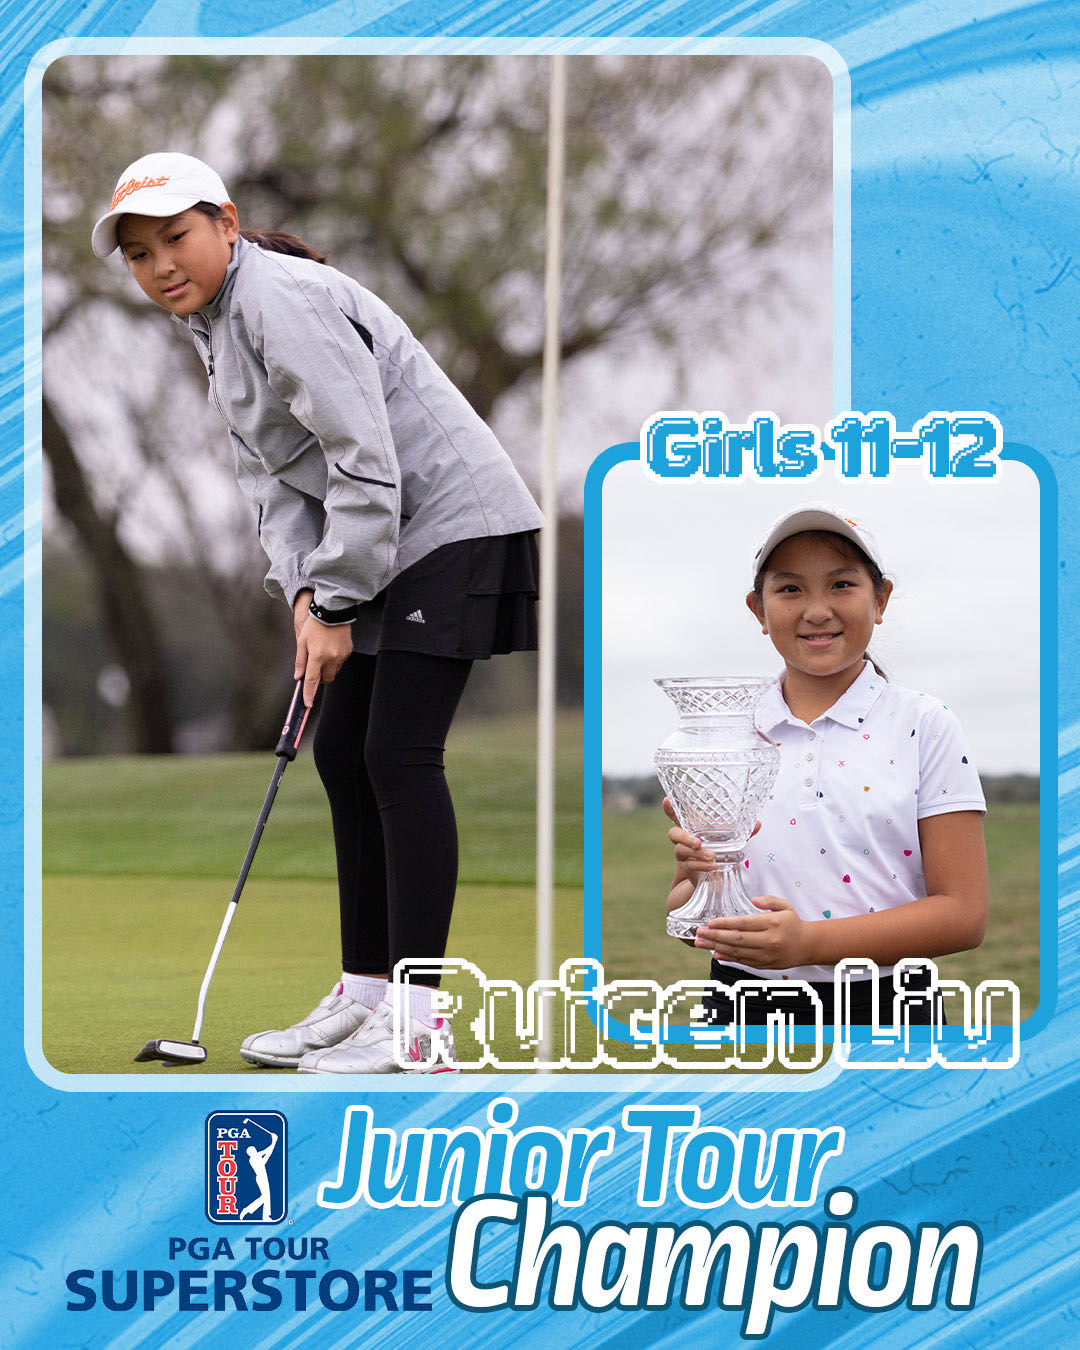 6th-grade Village Student Wins South Texas Junior Tour Championship in girls 11-12 group